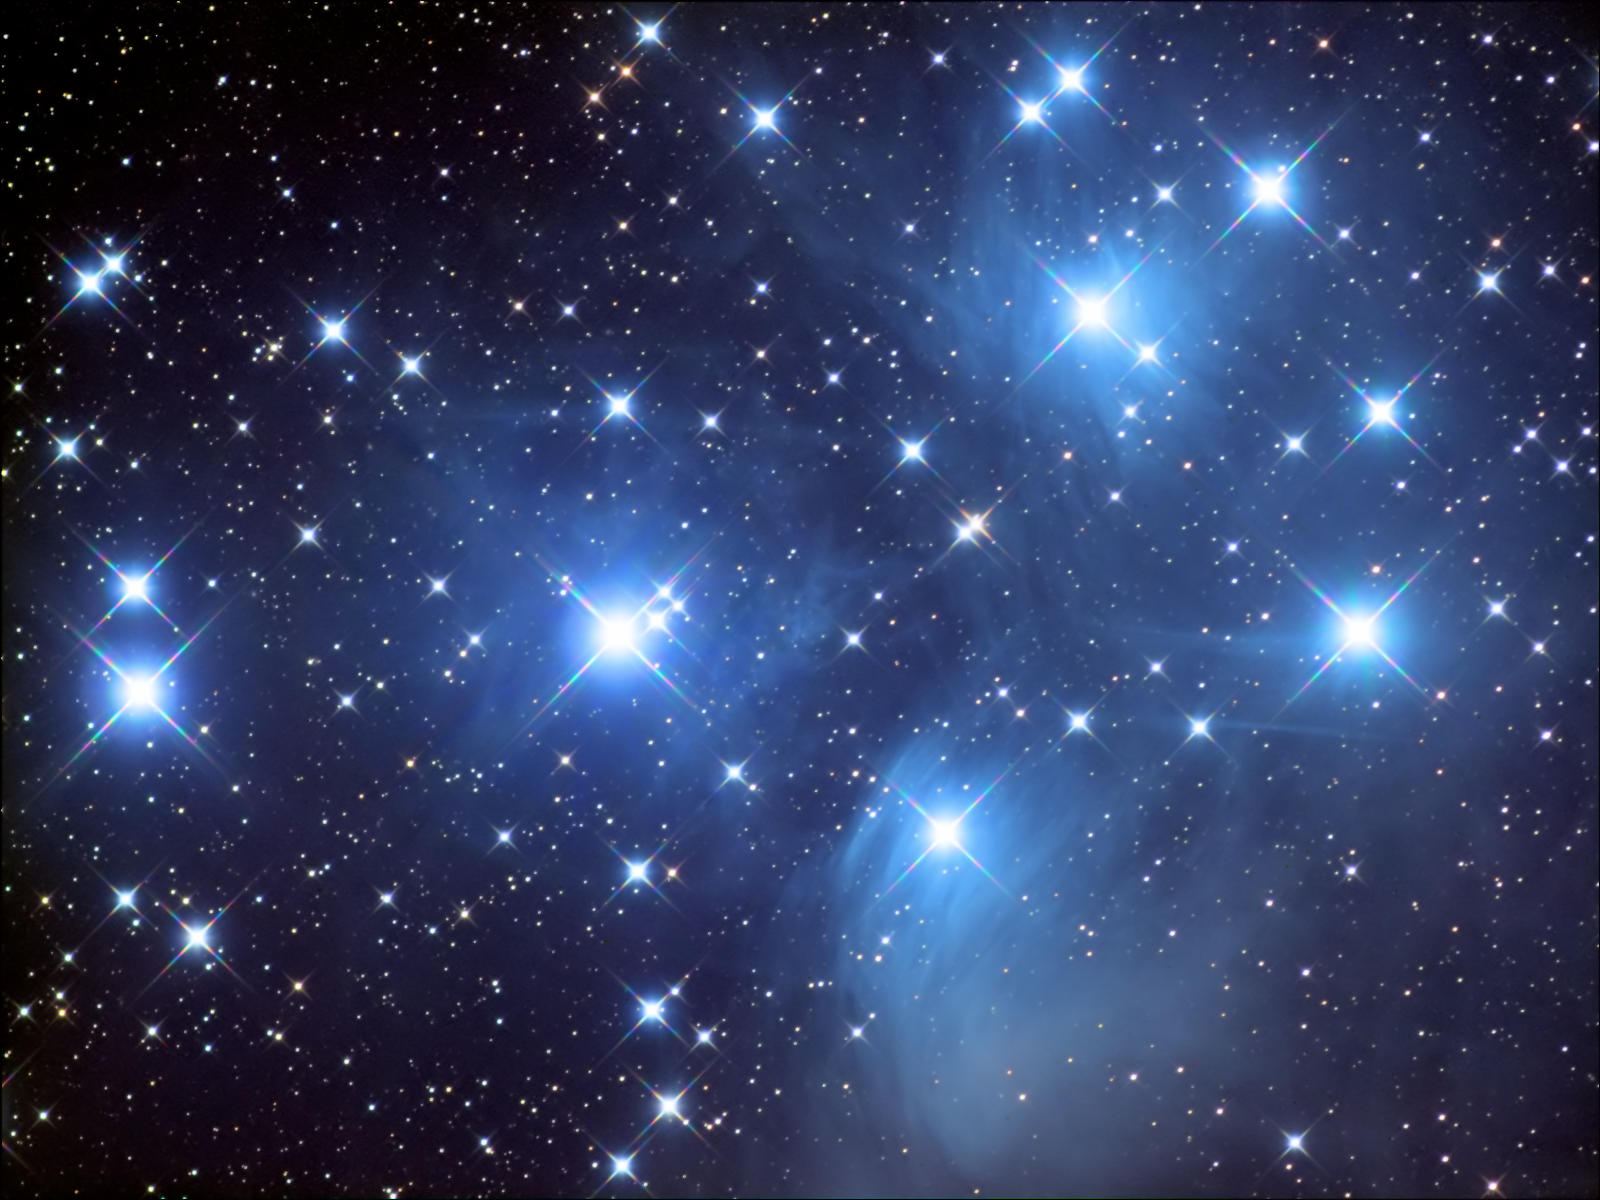 M45 - Open Cluster and Reflection Nebula in Taurus